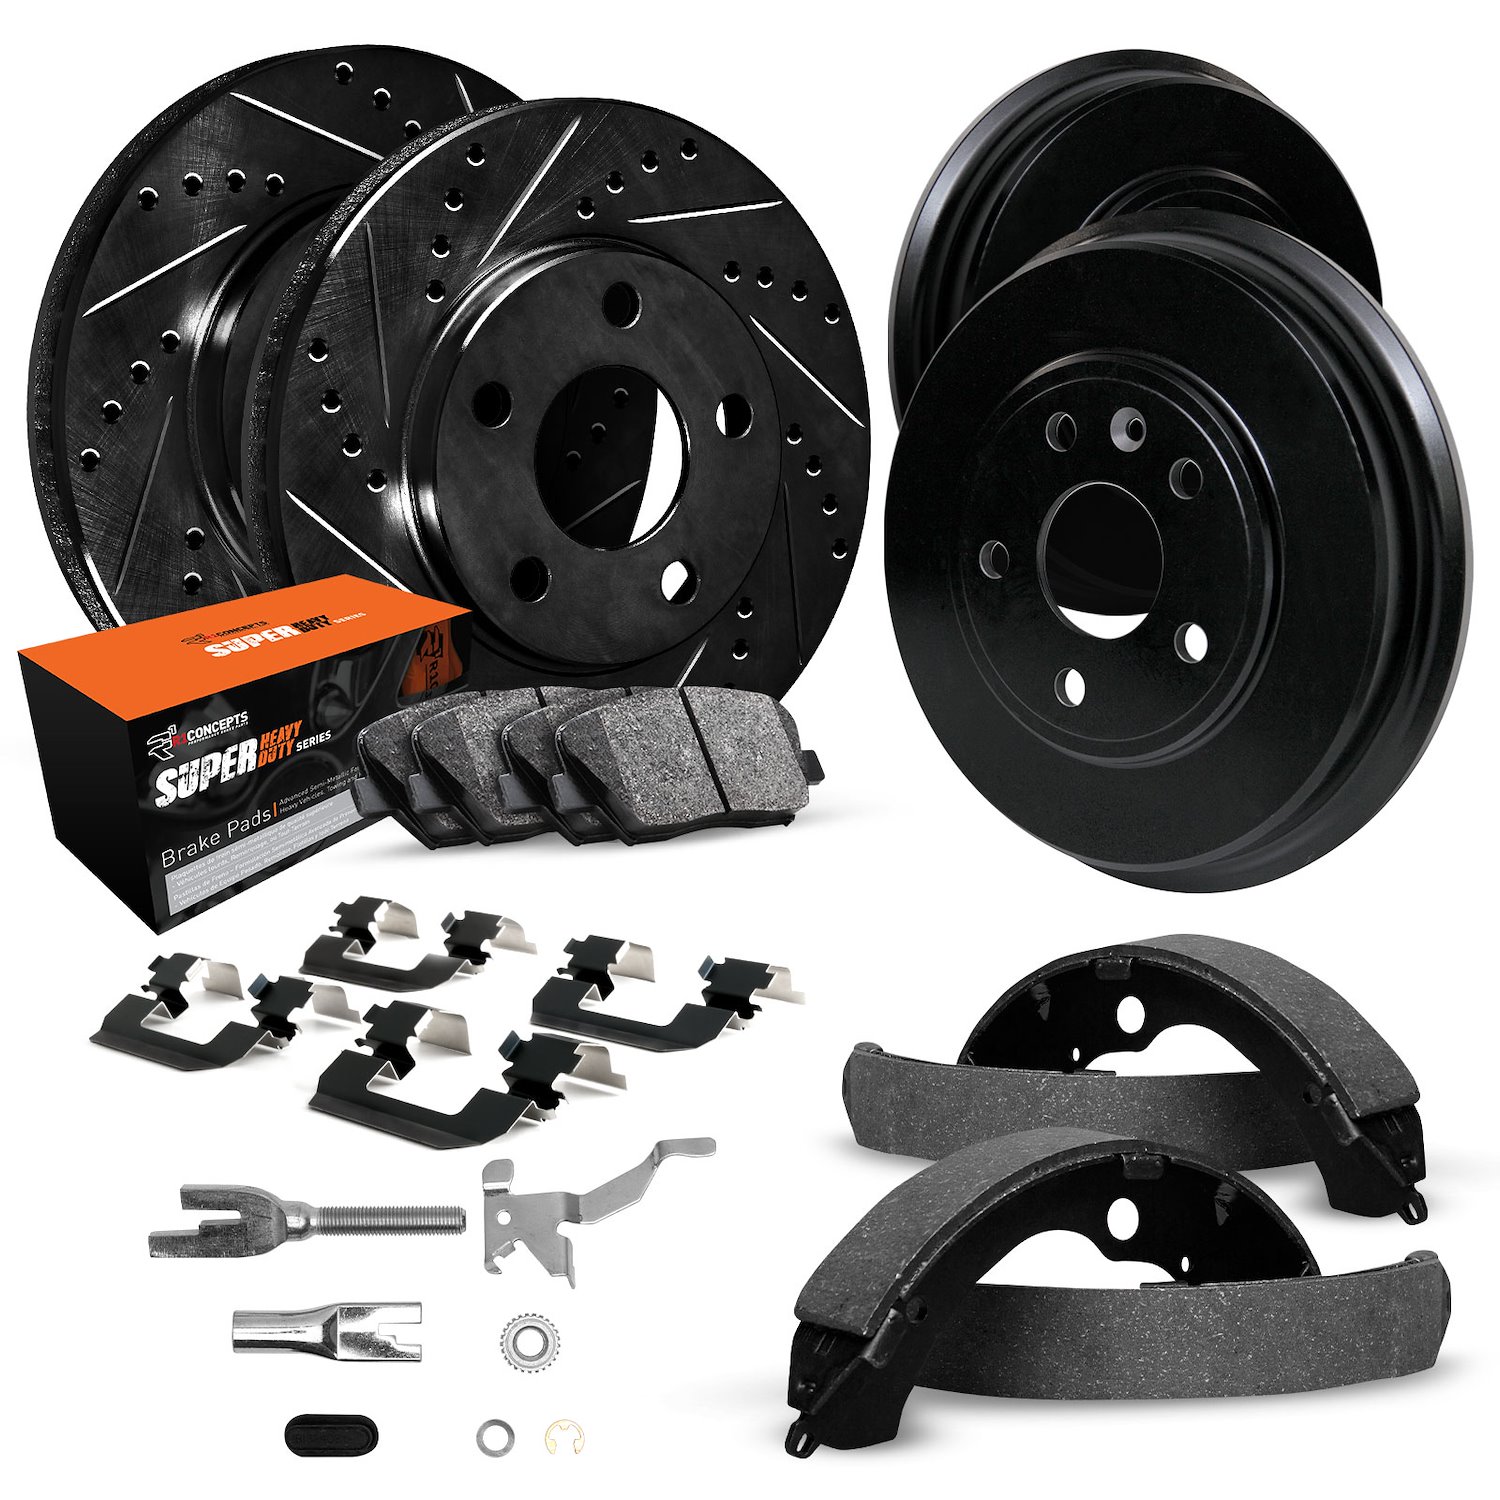 E-Line Drilled/Slotted Black Rotor & Drum Set w/Super-Duty Pads, Shoes, Hardware/Adjusters, 1992-2002 GM